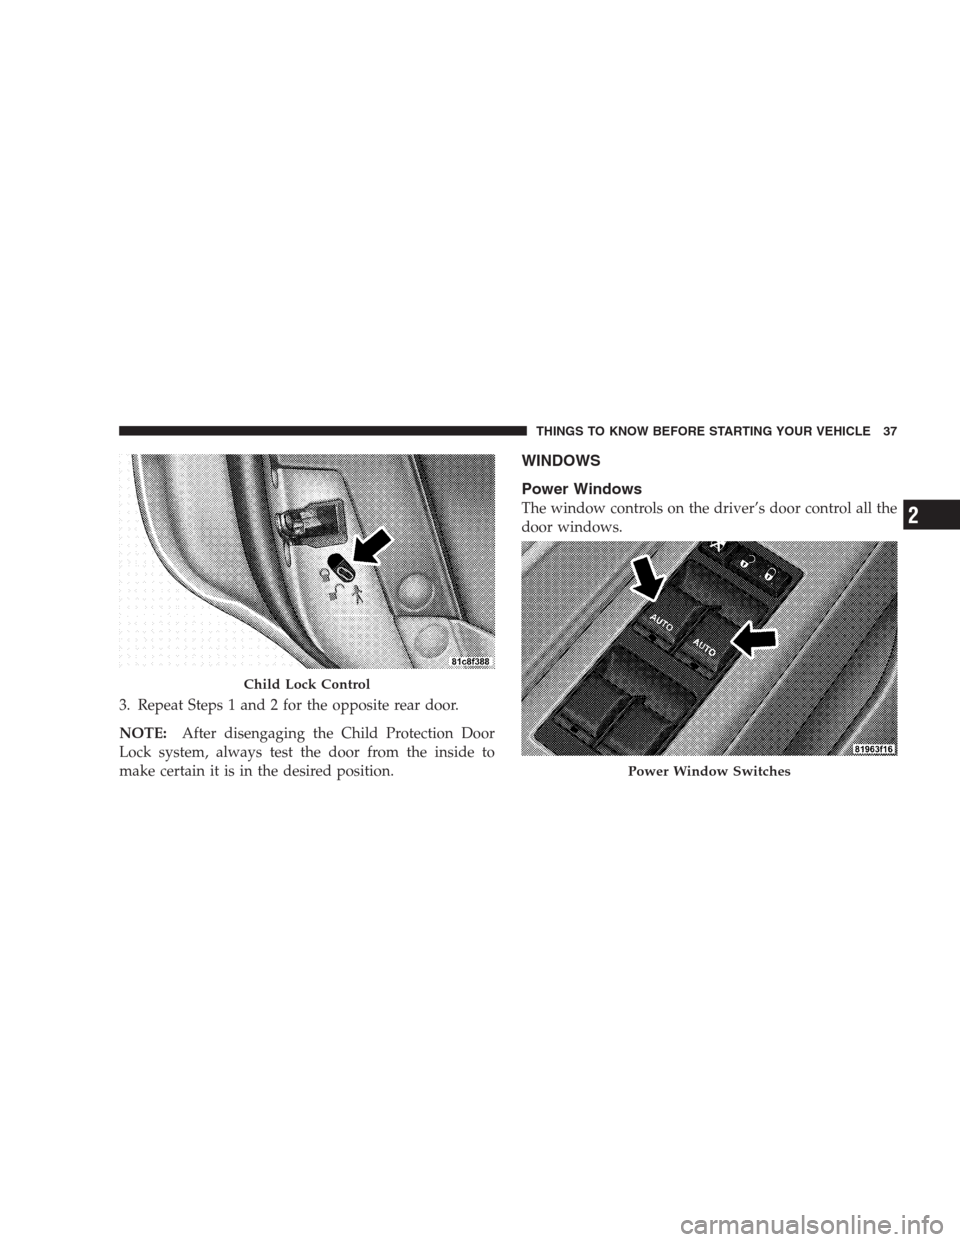 CHRYSLER 300 C 2009 1.G Owners Guide 3. Repeat Steps 1 and 2 for the opposite rear door.
NOTE:After disengaging the Child Protection Door
Lock system, always test the door from the inside to
make certain it is in the desired position.
WI